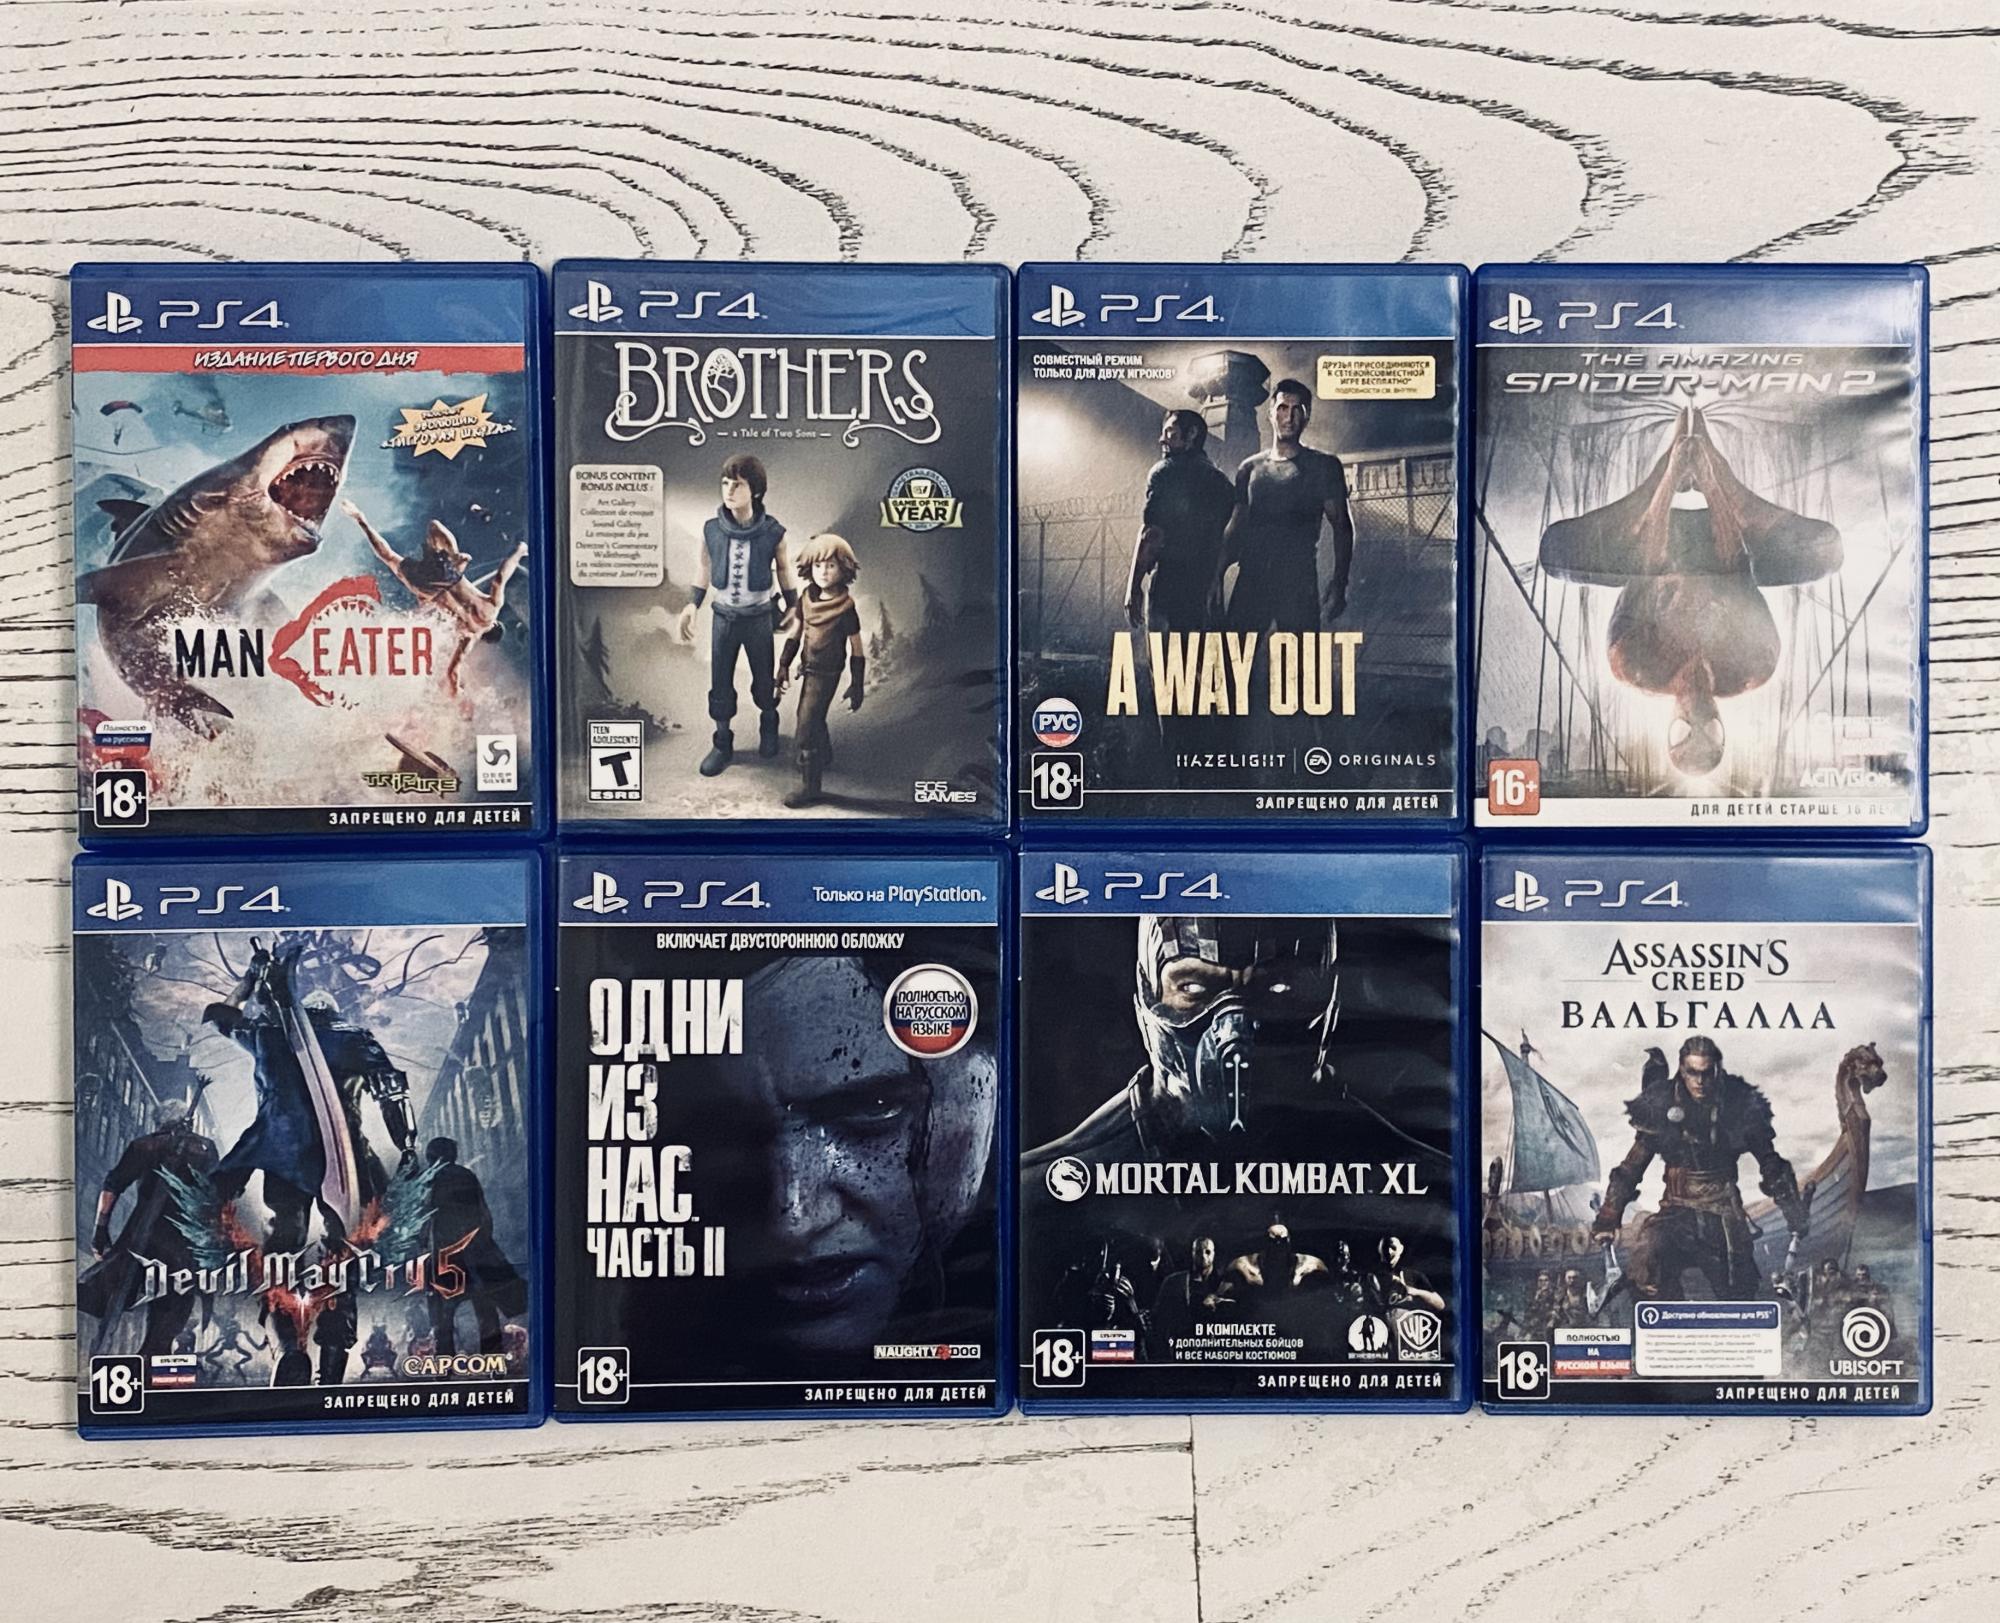 Brothers ps4. A way out ps4. A way out ps4 купить. A way out ps5.